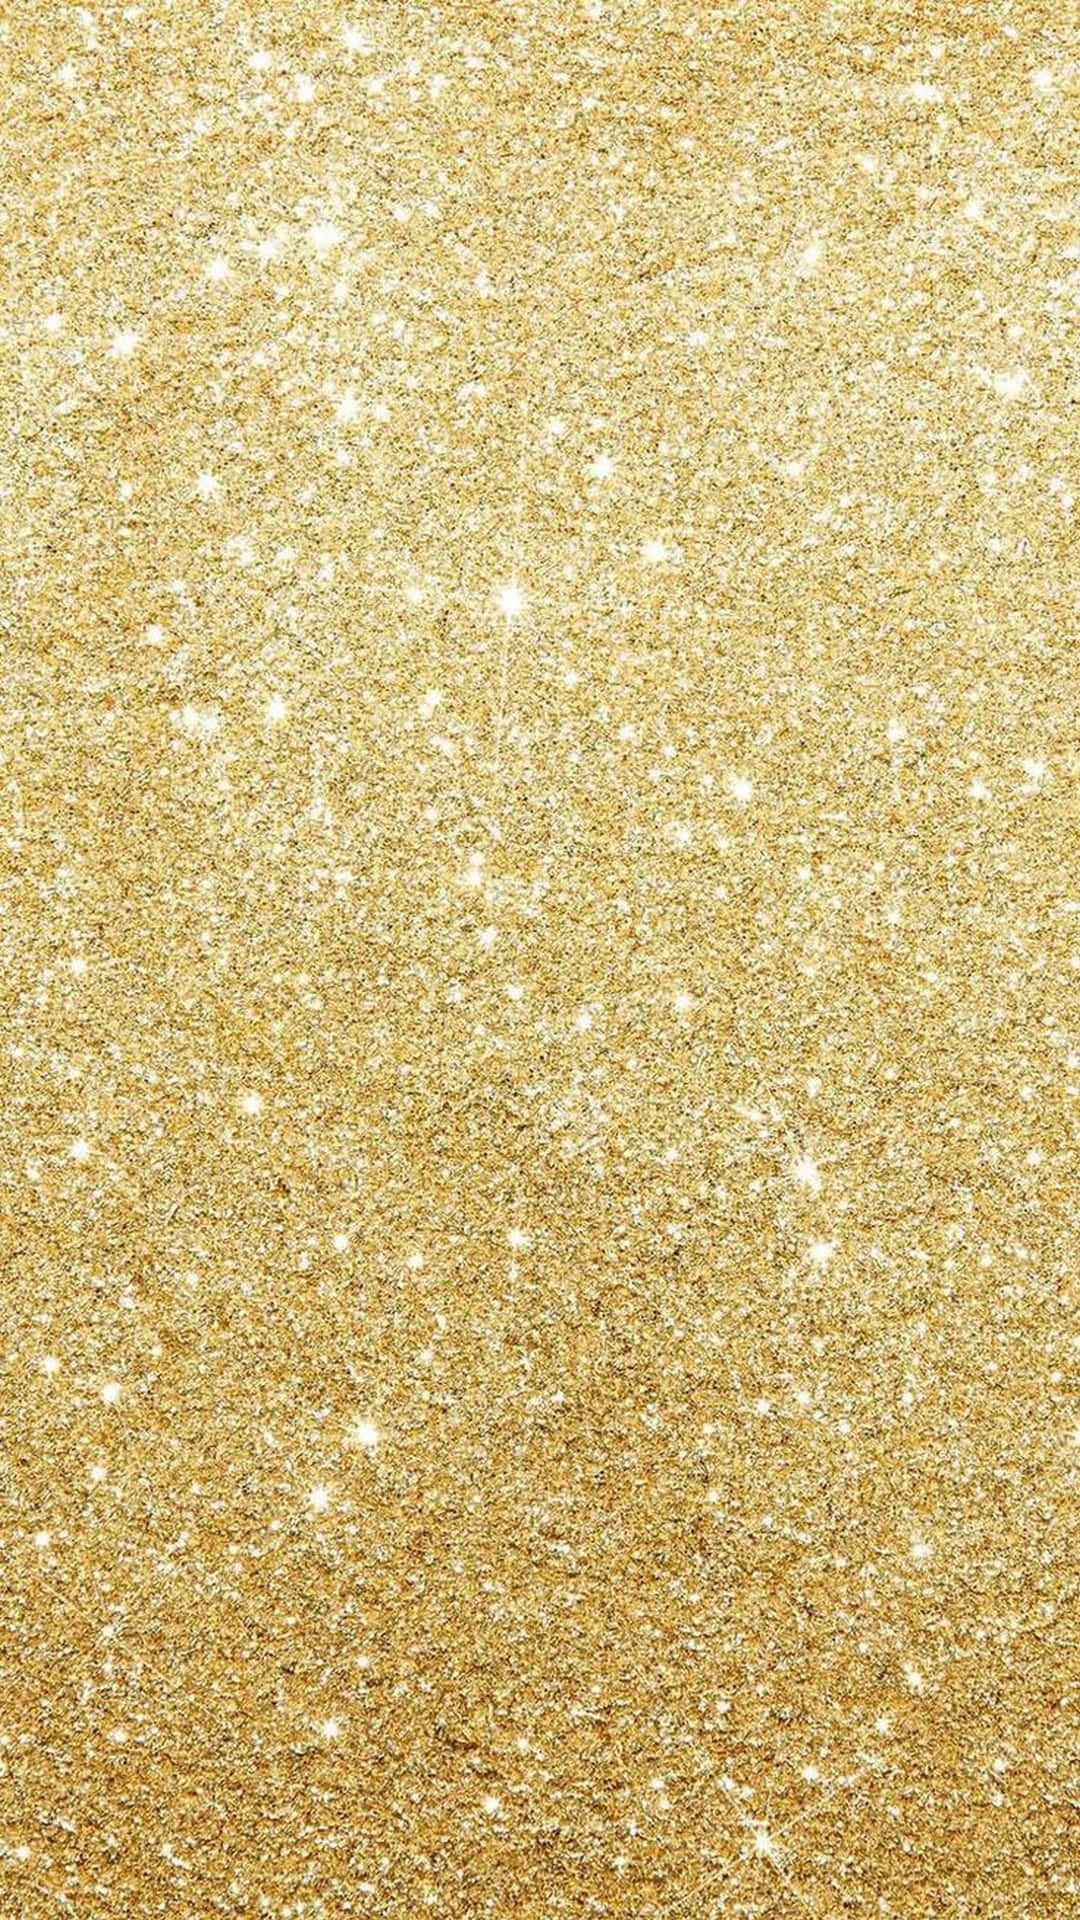 Gold Iphone Sparkling Coarse Texture